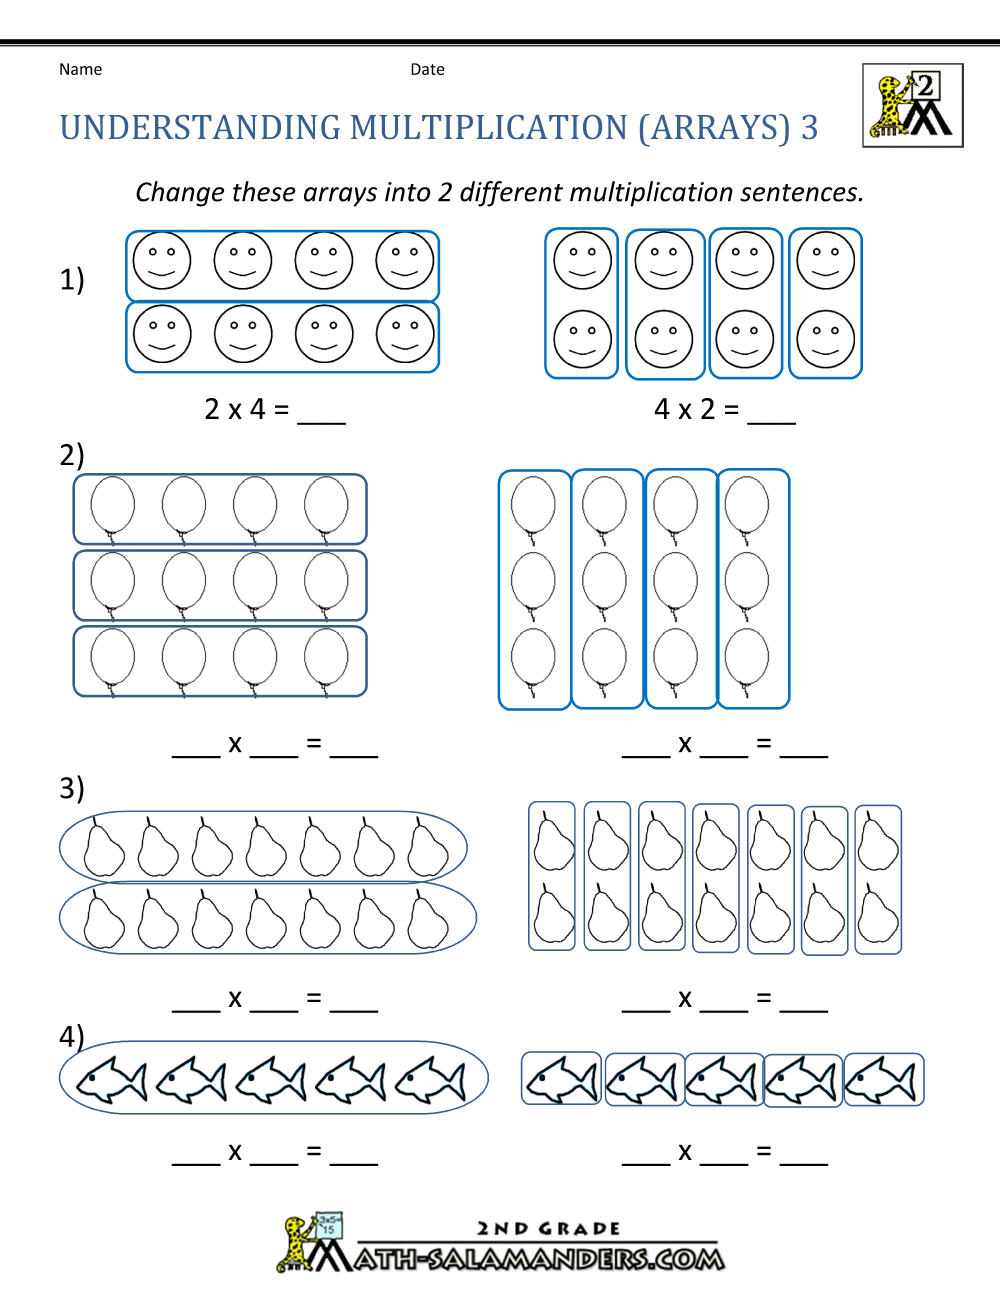 multiplication-worksheets-2-times-tables-multiplication-teaching